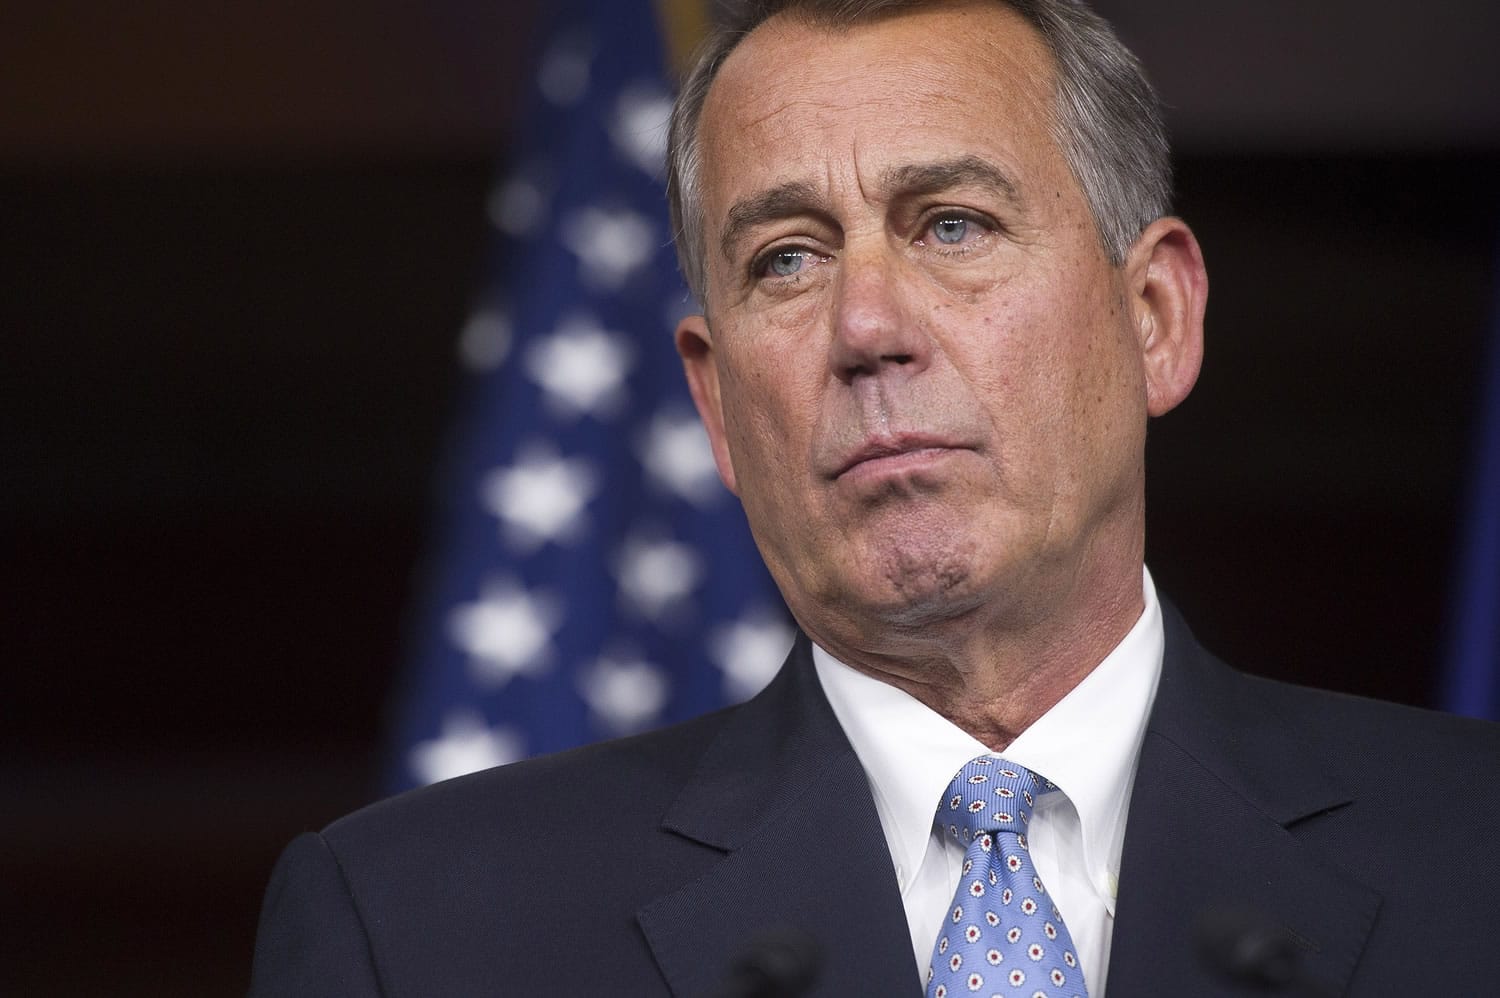 &quot;(President Obama's) going to burn himself if he continues to go down this path.&quot;
House Speaker John Boehner, R-Ohio